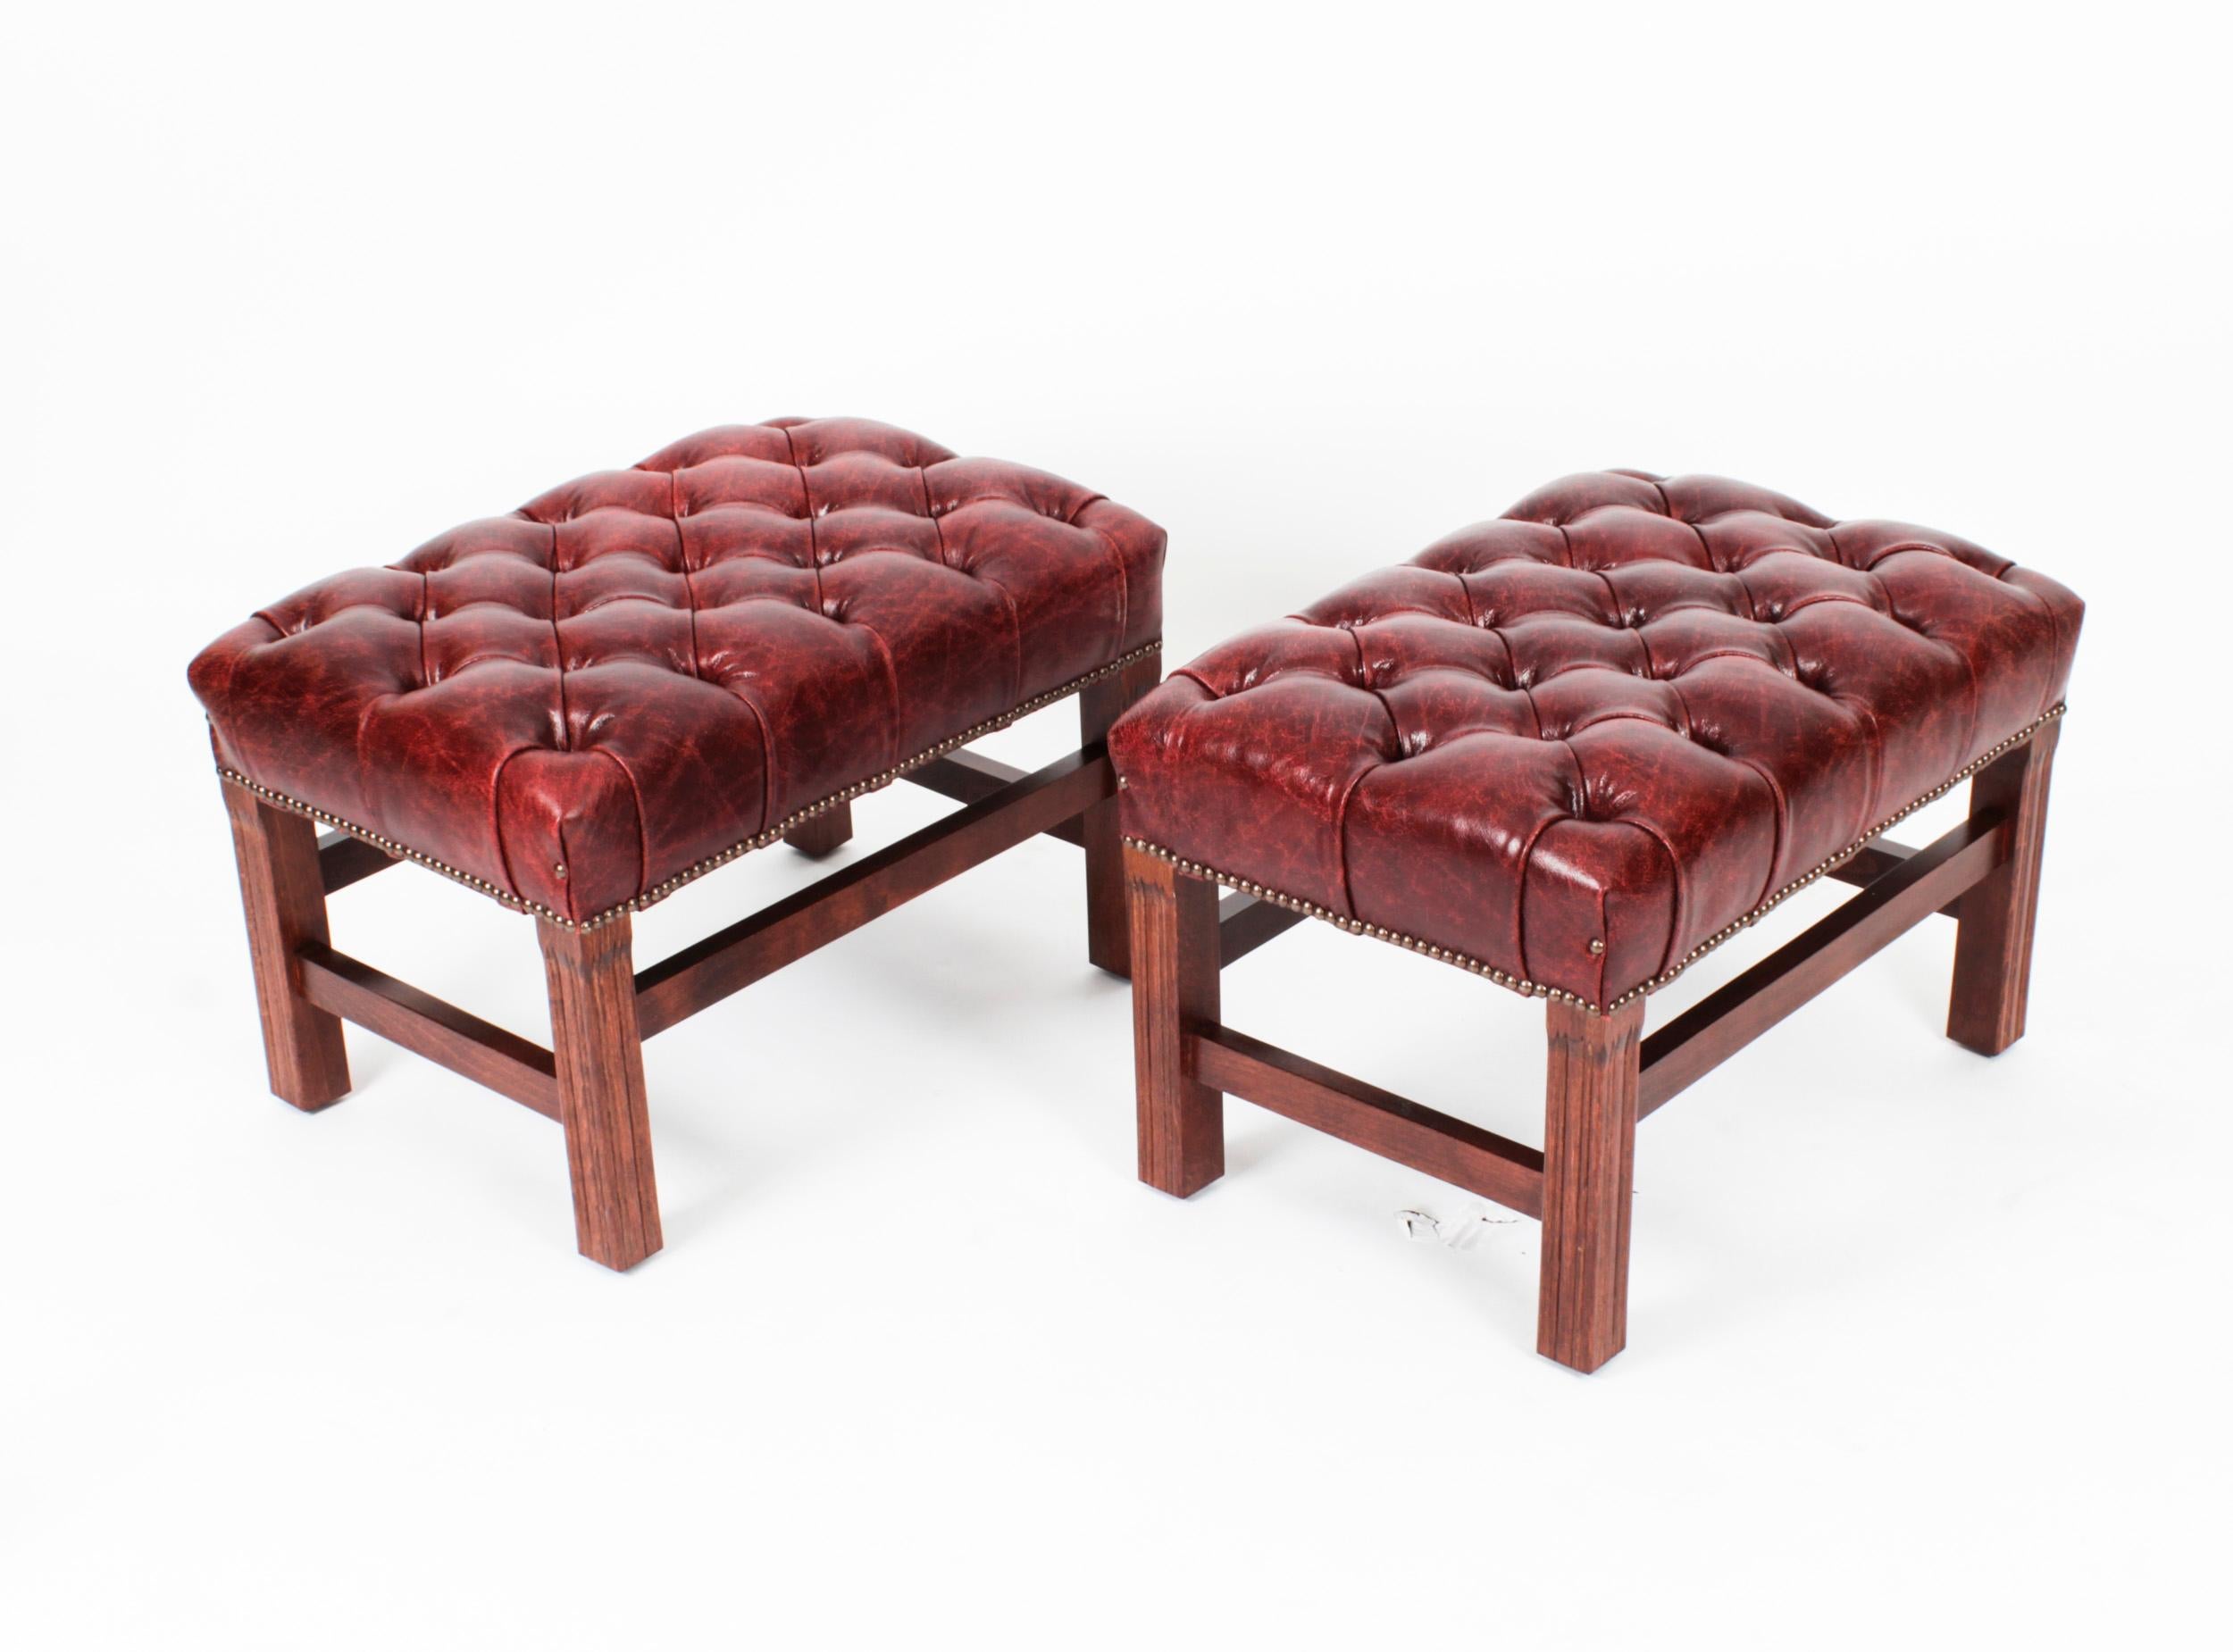 Bespoke Pair Buttoned Leather Stools Murano Port 20th C For Sale 5